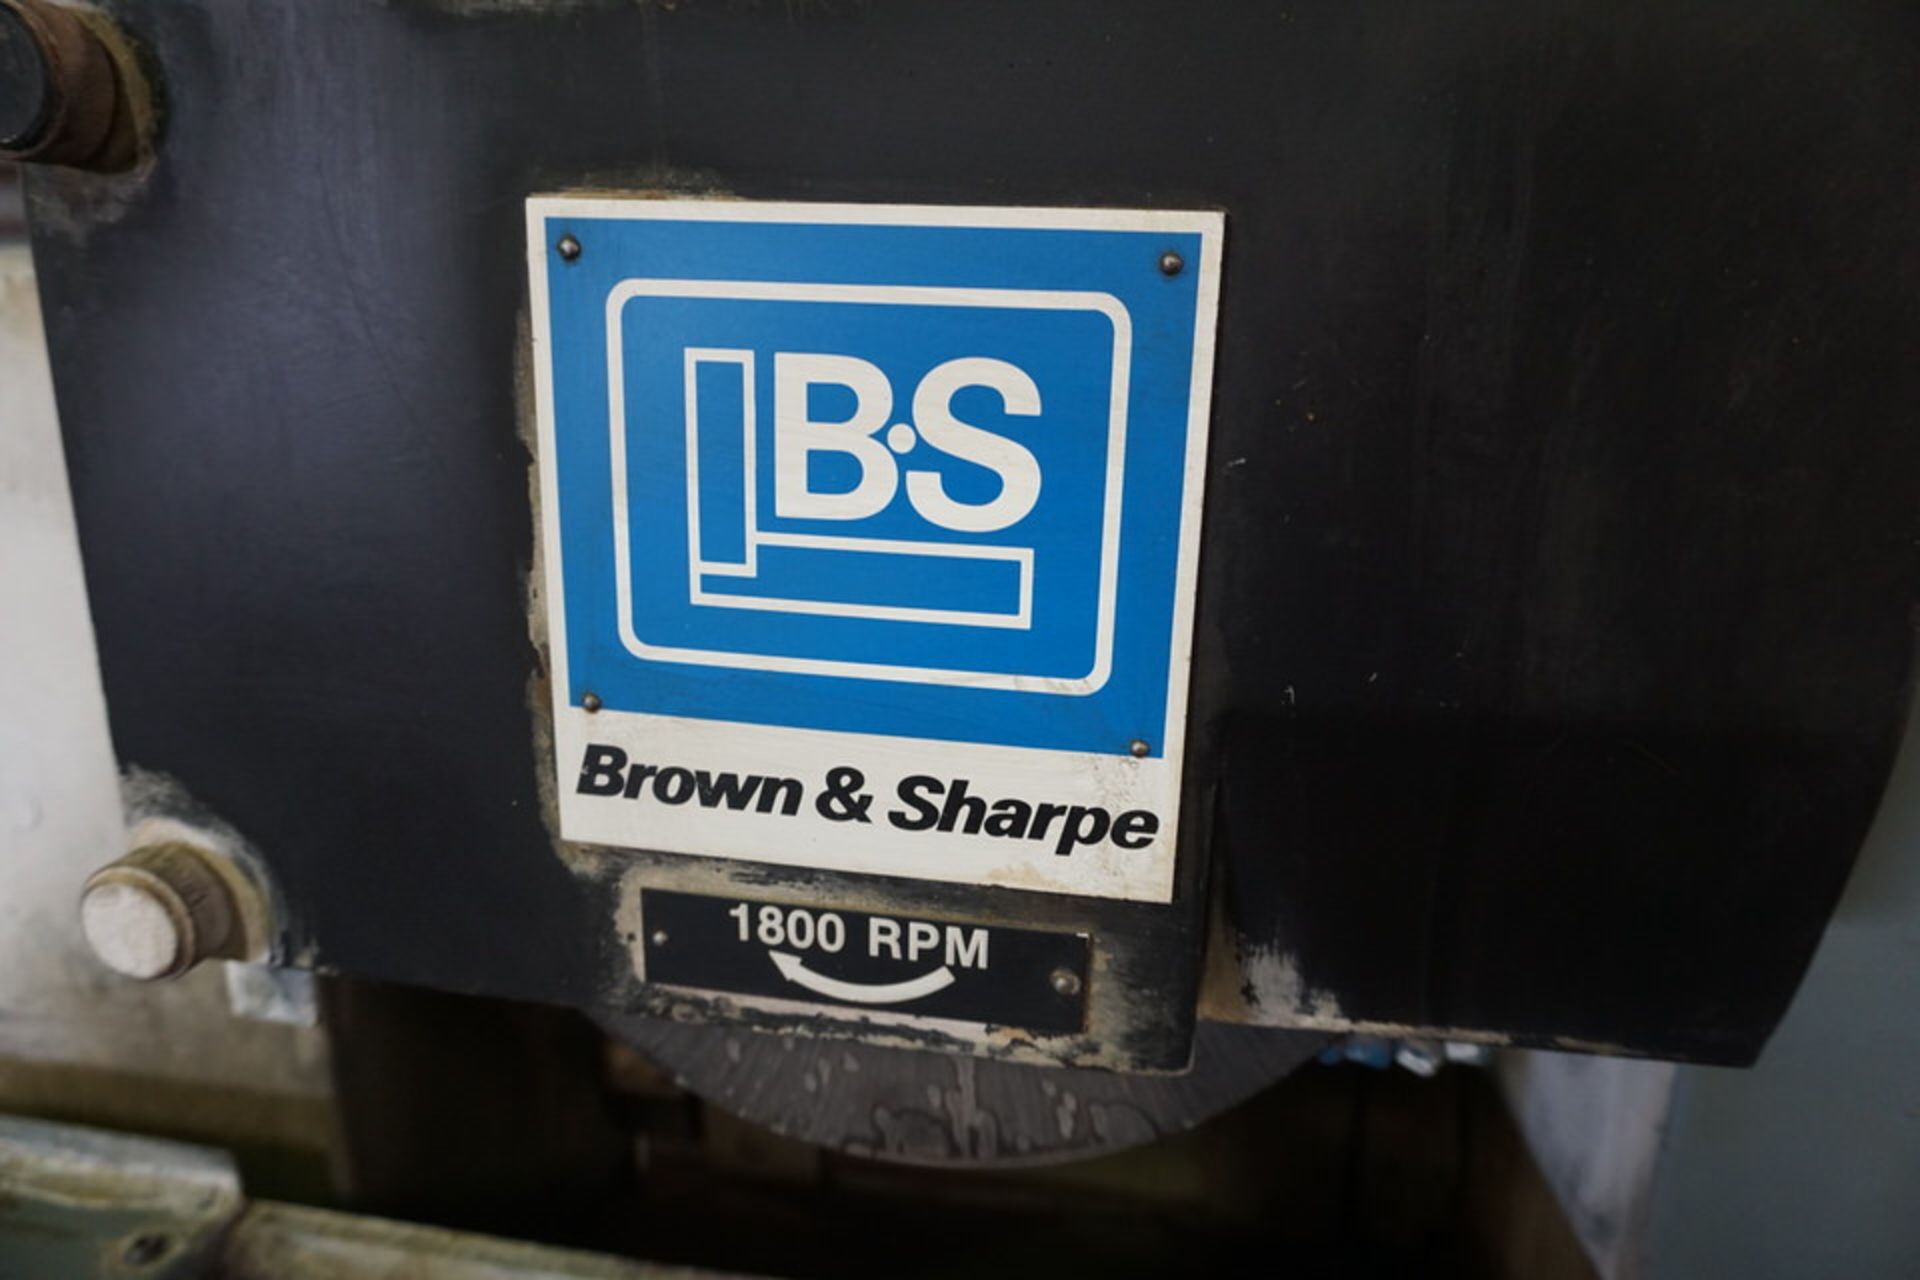 BROWN & SHARPE SURFACE GRINDER, MODEL; 824 TECH MASTER, BROWN & SHARPE CYCLE SIZE CONTROL - Image 2 of 7